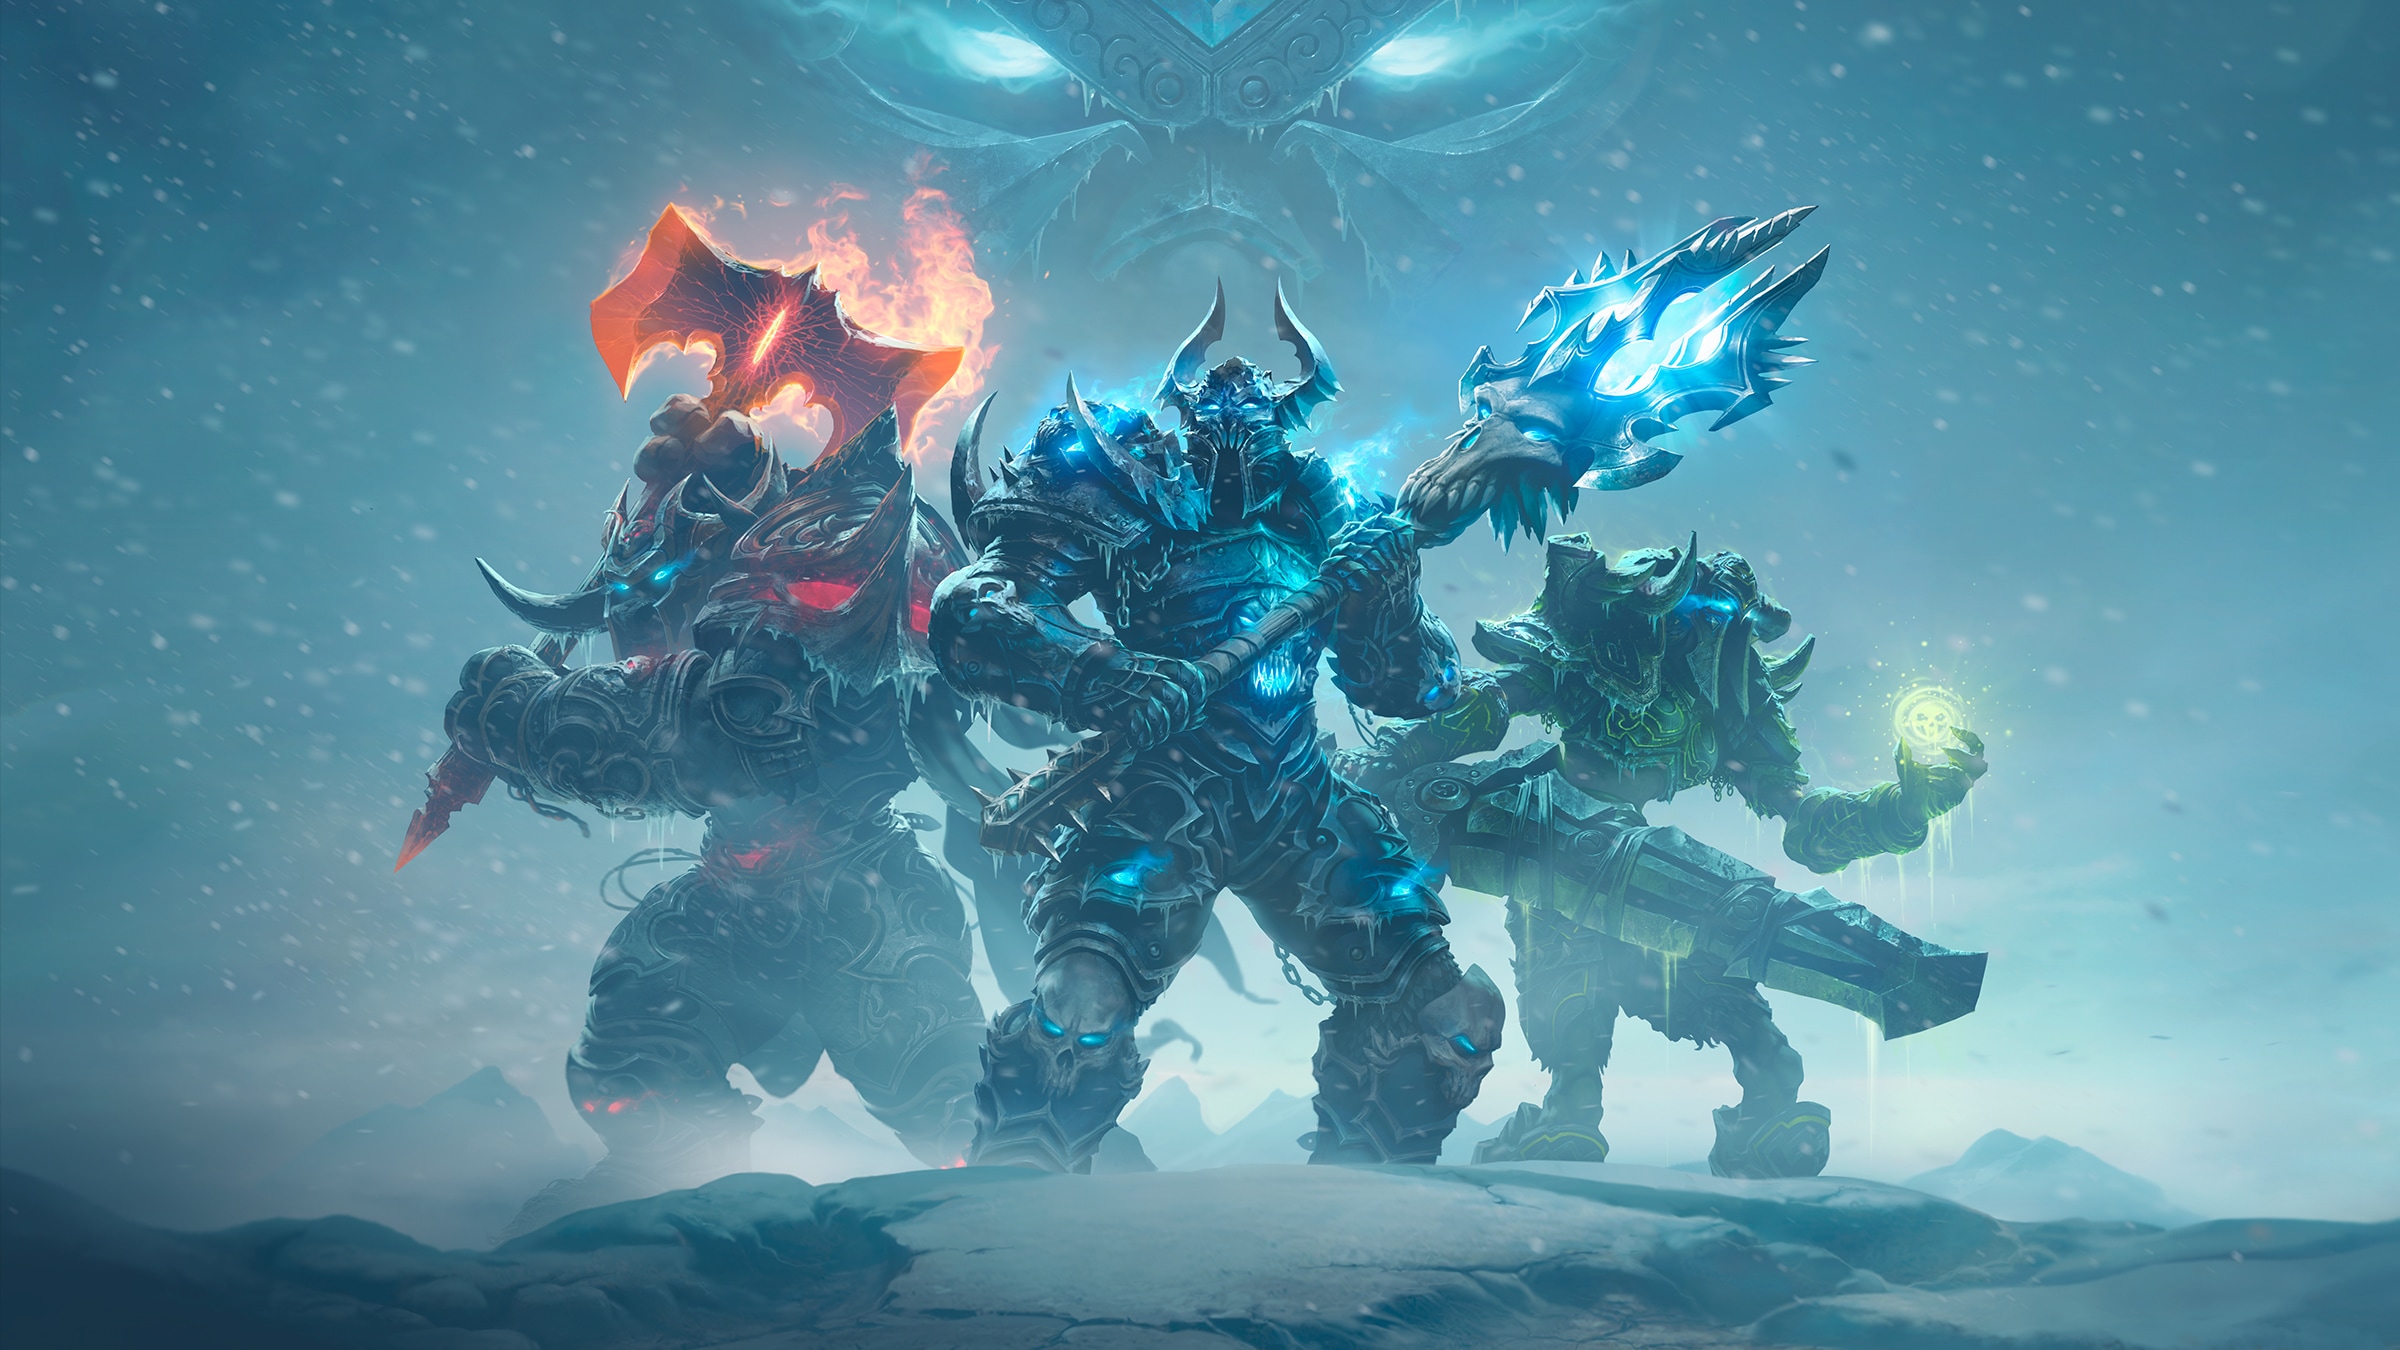 Shatter the Ice: The Wrath of the Lich King Classic™ Goes Live September 27